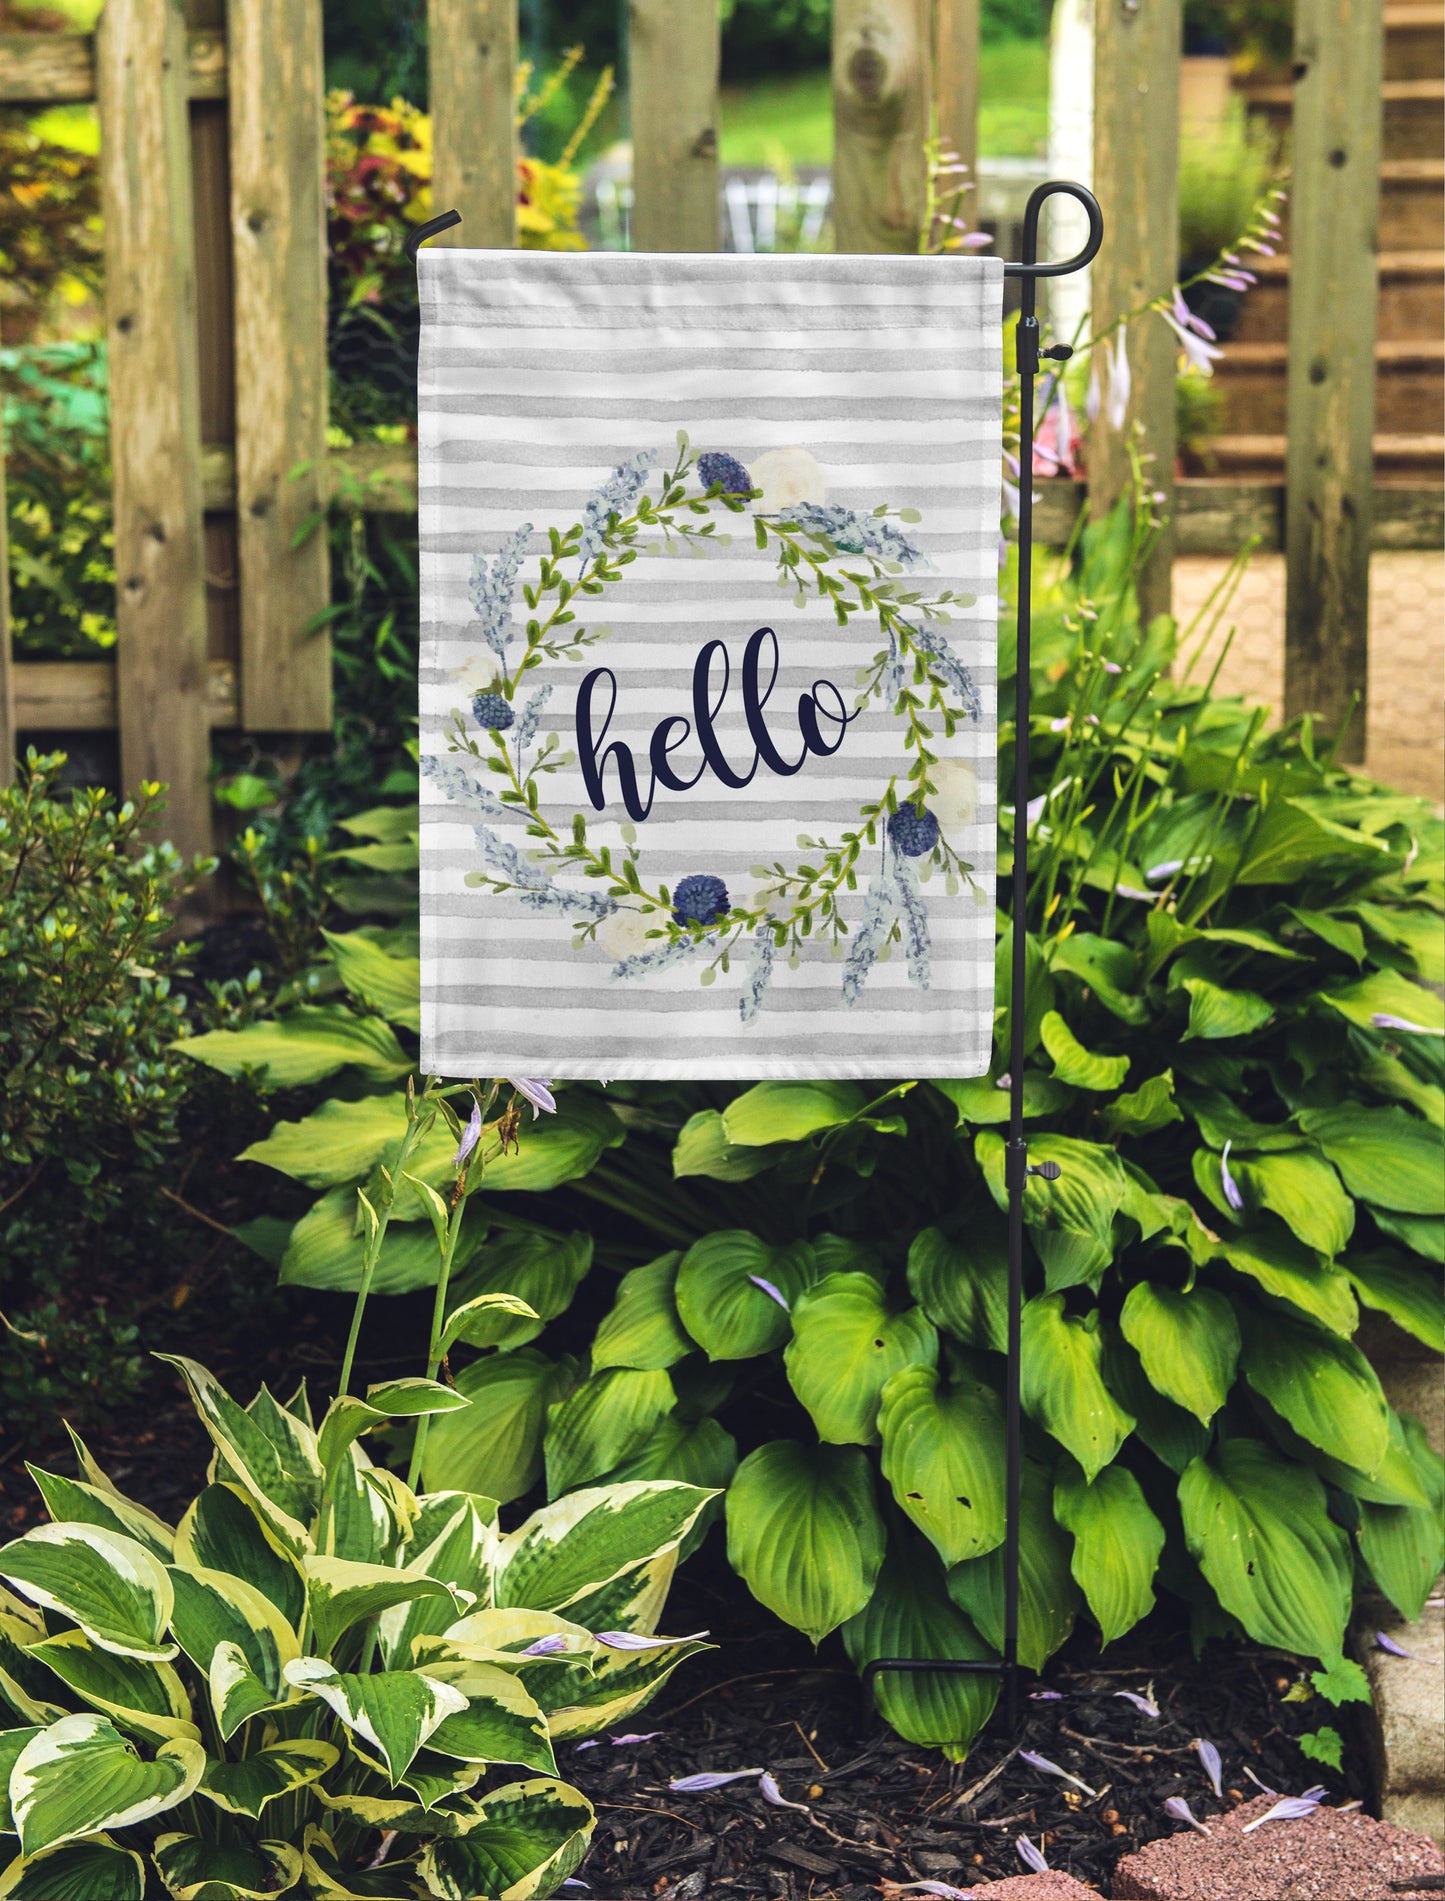 Hello Grey Stripe Floral Garden Flag 12" x 18" - Double Sided - Second East